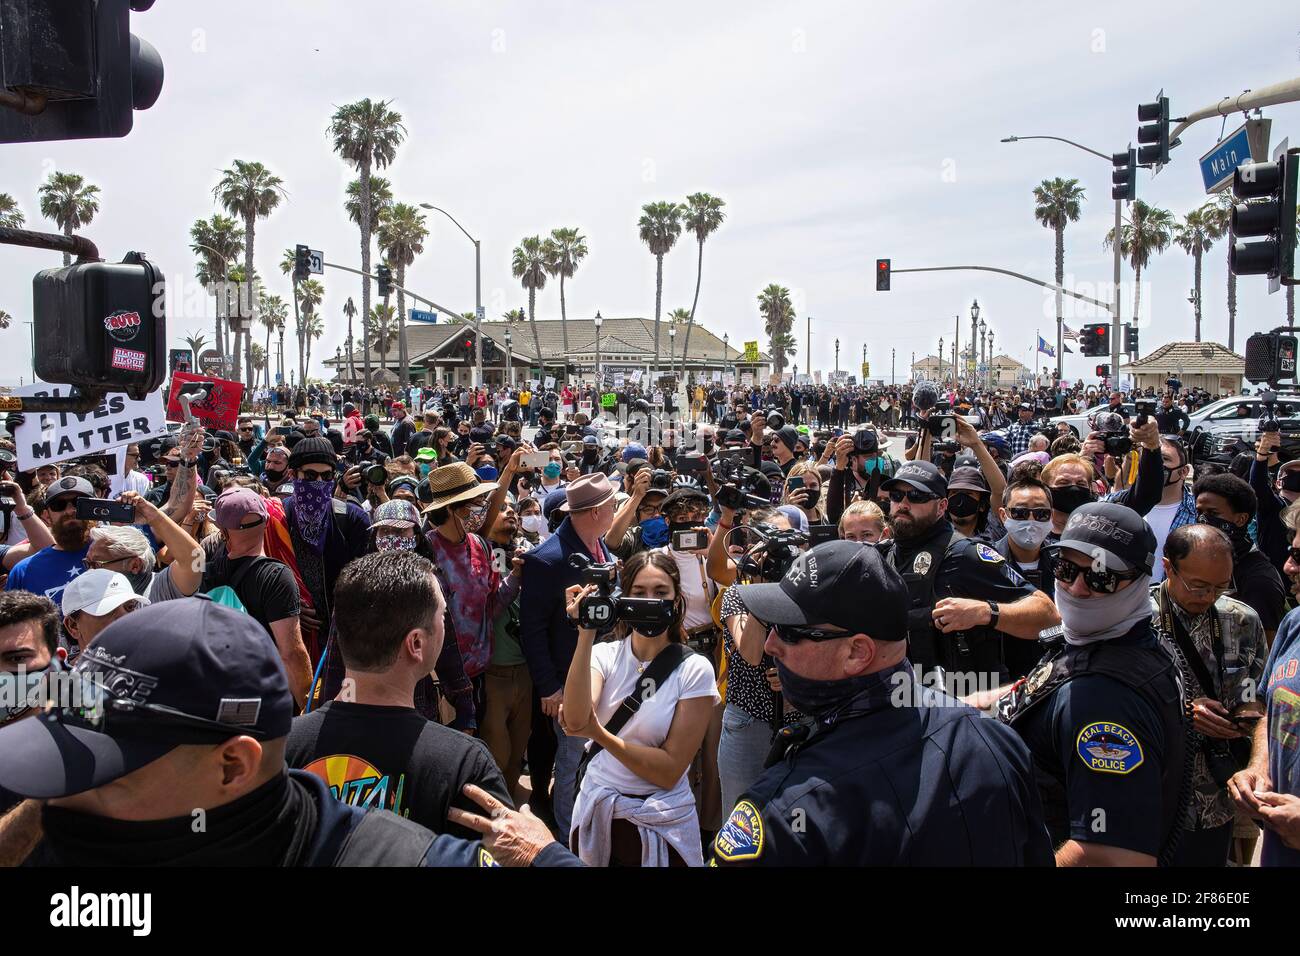 Crowds of protesters and counter-protesters gather in front of the Huntington Beach Pier during the demonstration. Upon word spreading amongst various social media and messaging platforms that there was to be a 'White Lives Matter' protest at the Huntington Beach Pier at 1pm, a large group of counter protesters arrived at the pier to stop the 'White Lives Matter' protest. The day resulted to clashes between counter protesters and white lives matter protesters both verbal and physical. (Photo by Stanton Sharpe/SOPA Images/Sipa USA) Stock Photo